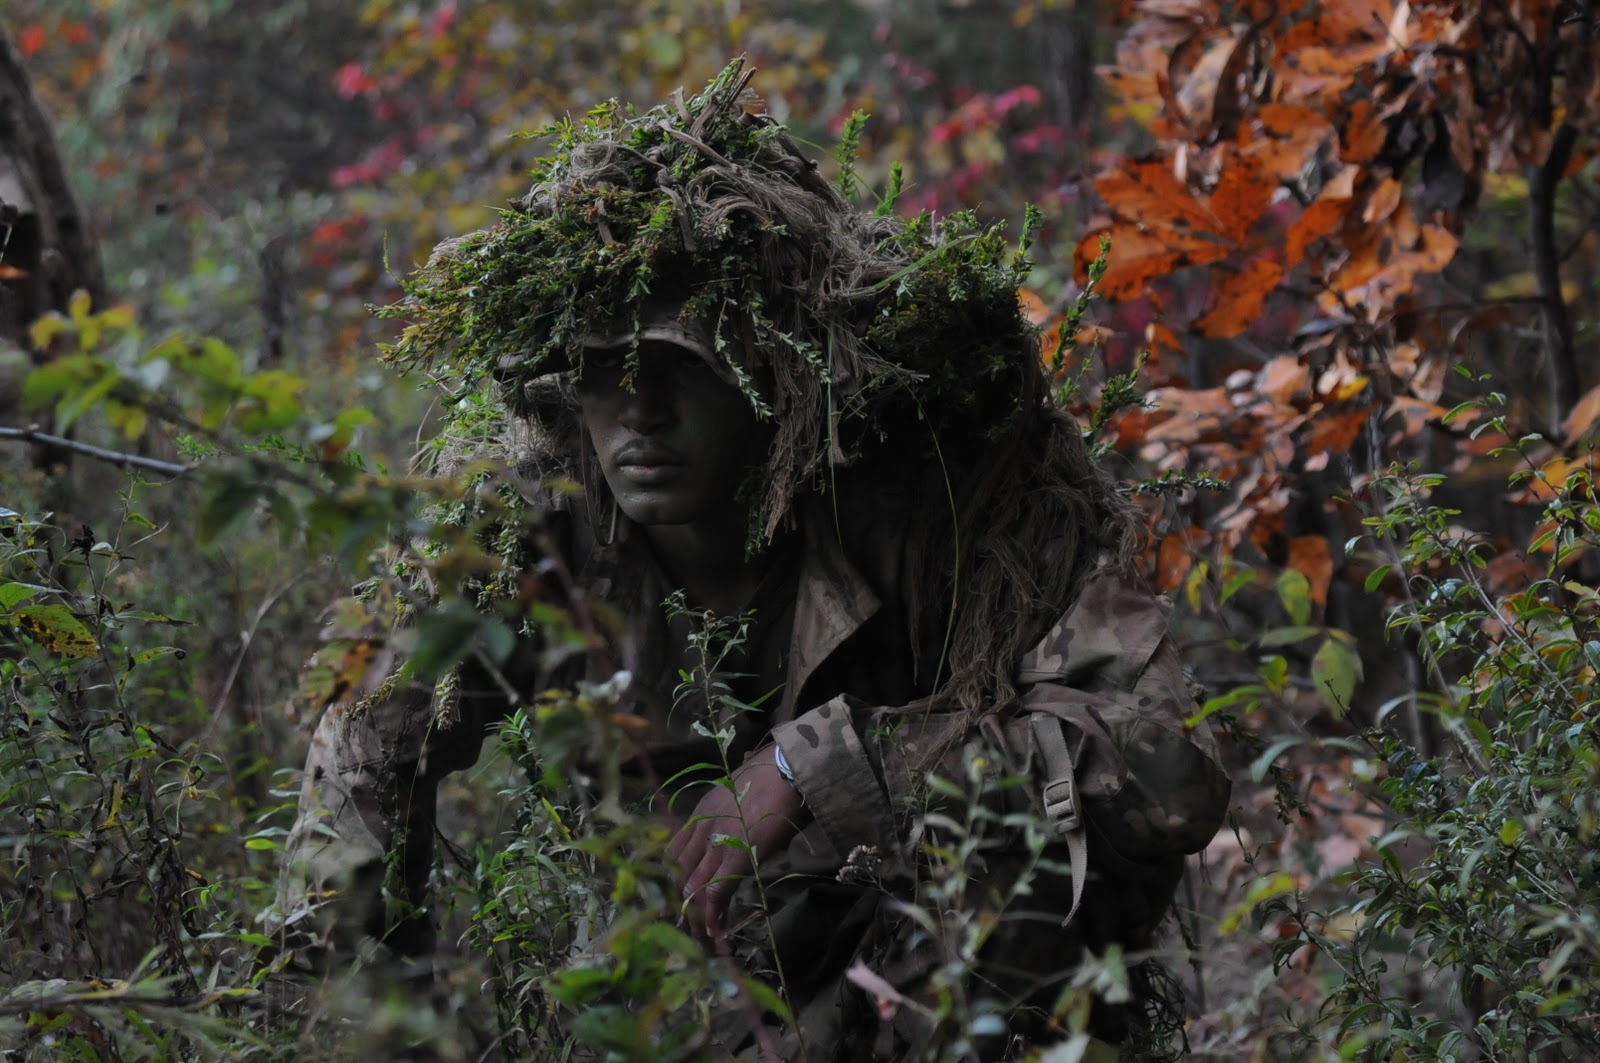  Gear and Military Clothing News Marine Wearing MultiCam Ghillie Suit